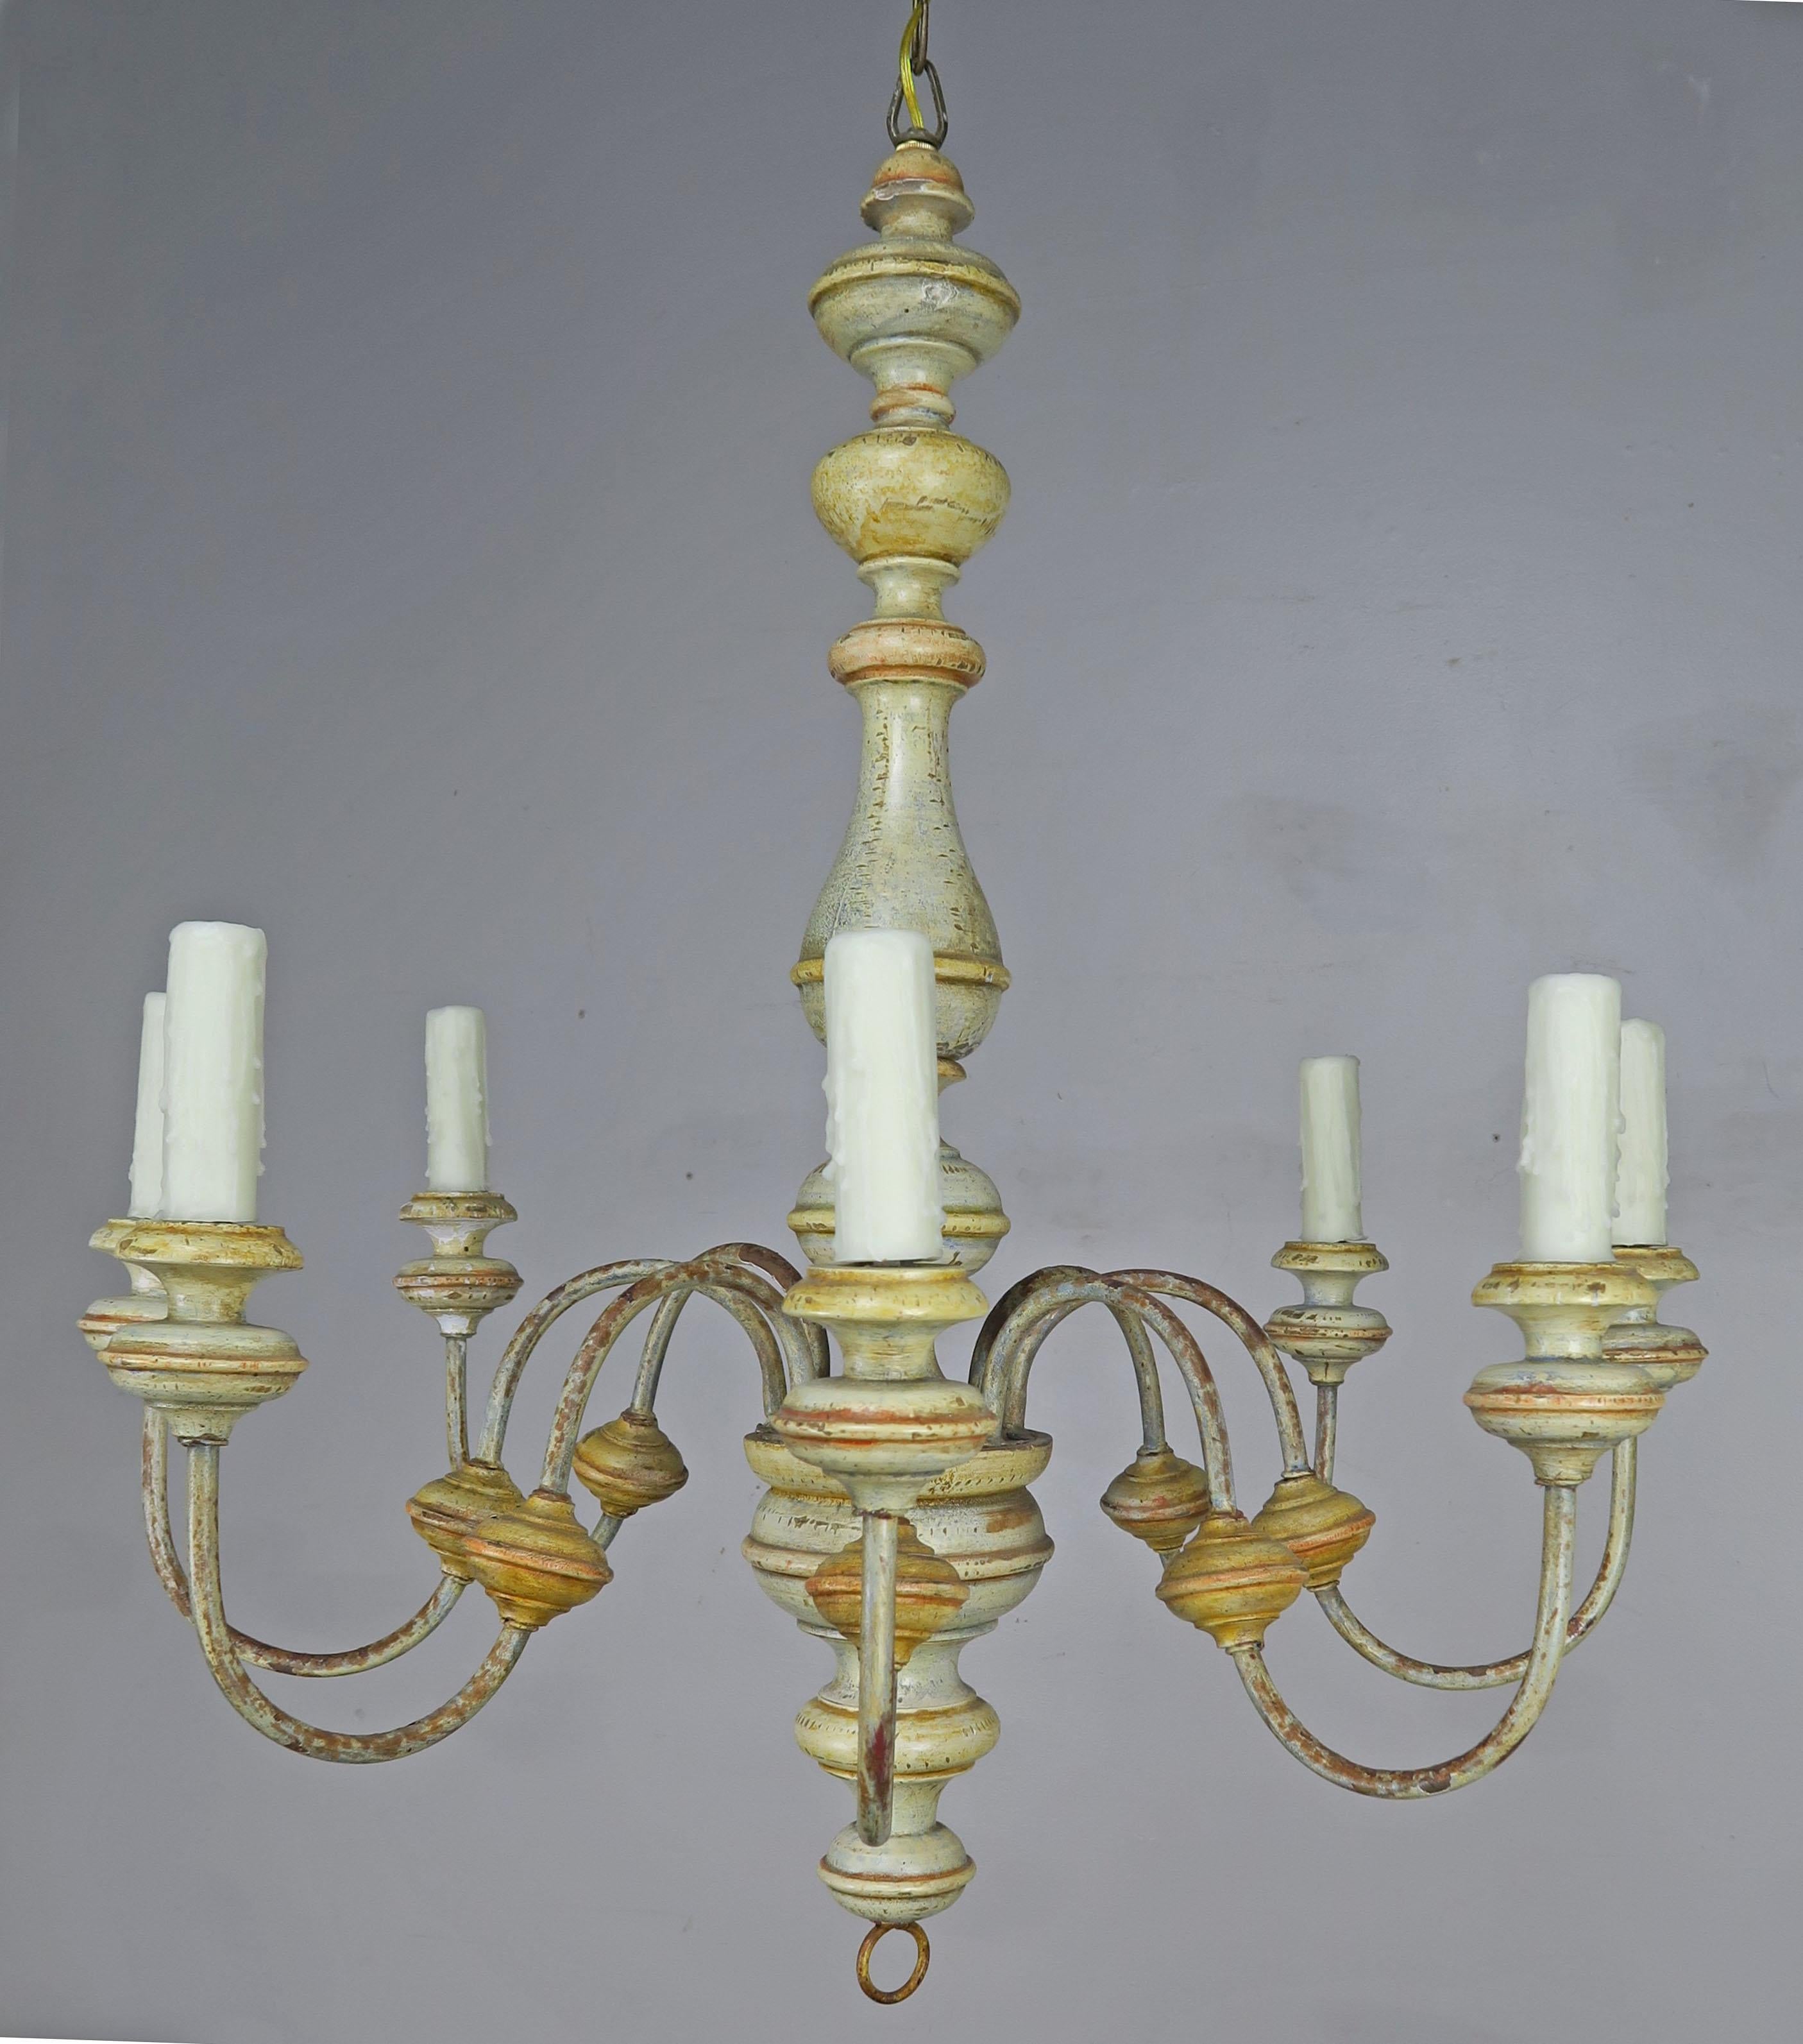 (8) light Italian chandelier painted in soft hues of celadon and gold. The fixture is newly rewired with cream drip wax candle covers. Includes chain and canopy.